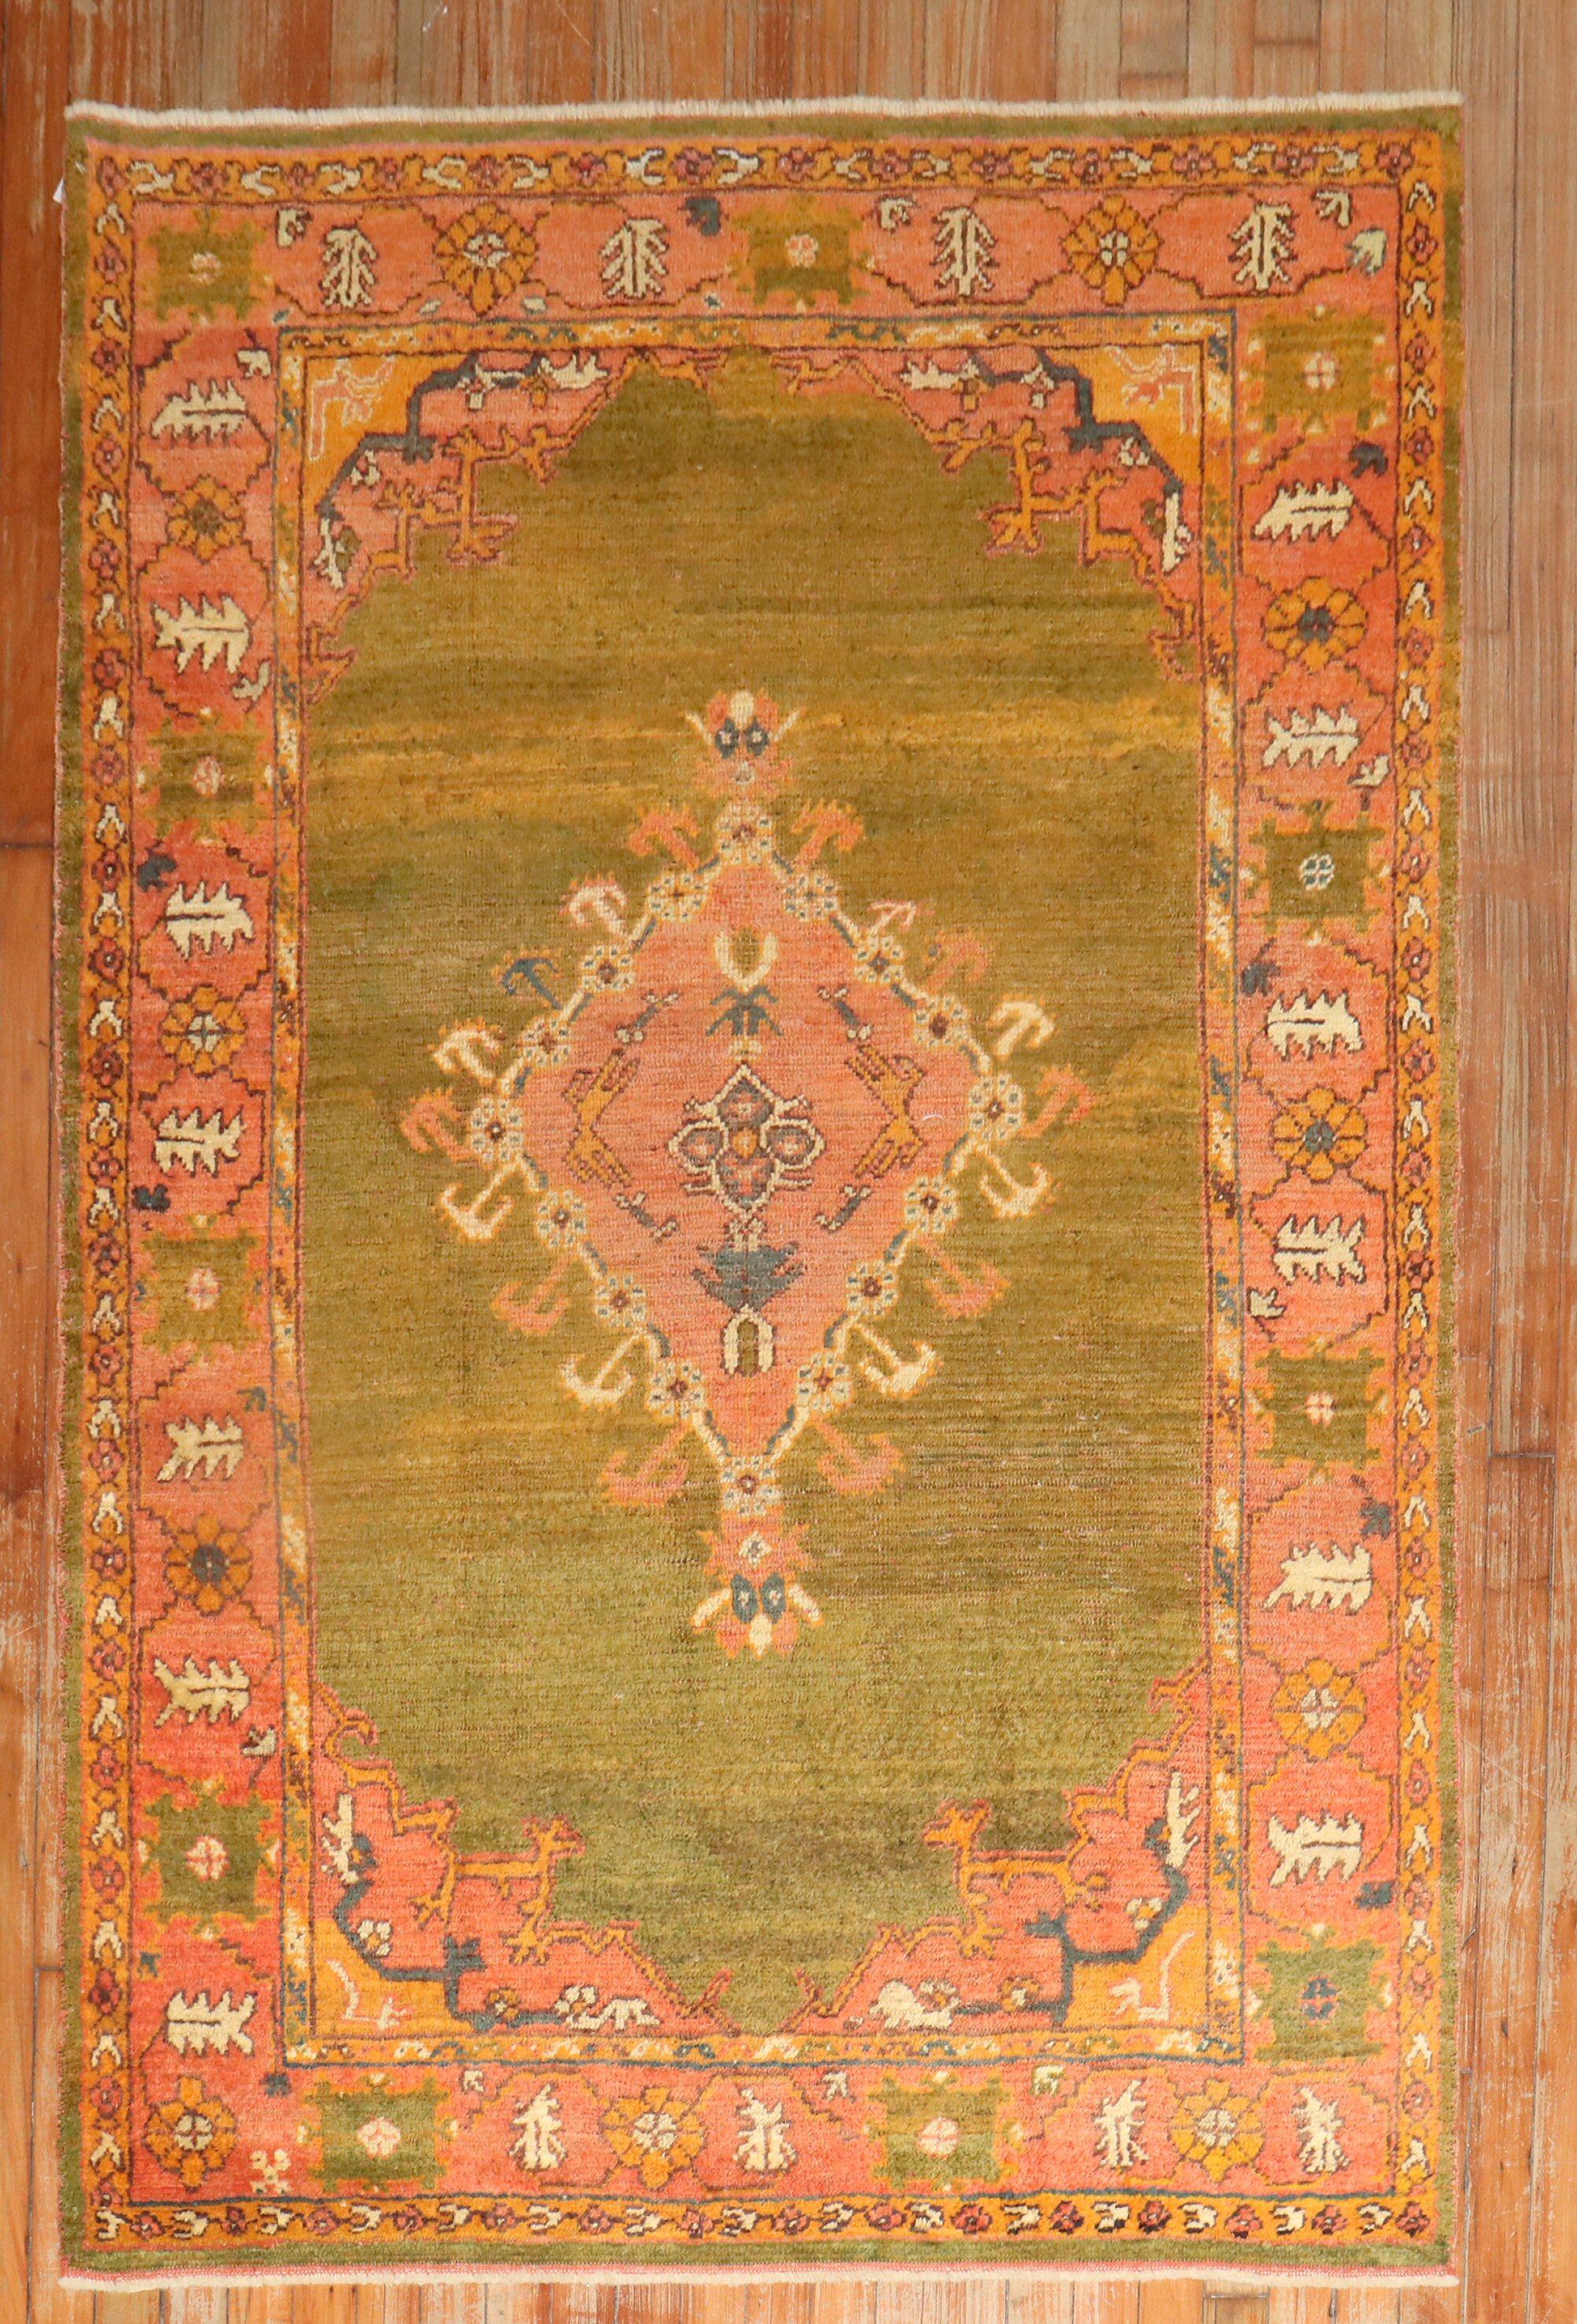 An early 20th century Antique Turkish Oushak rug highlighted by a rare green color ground.

Measures: 4' x 6'6''.